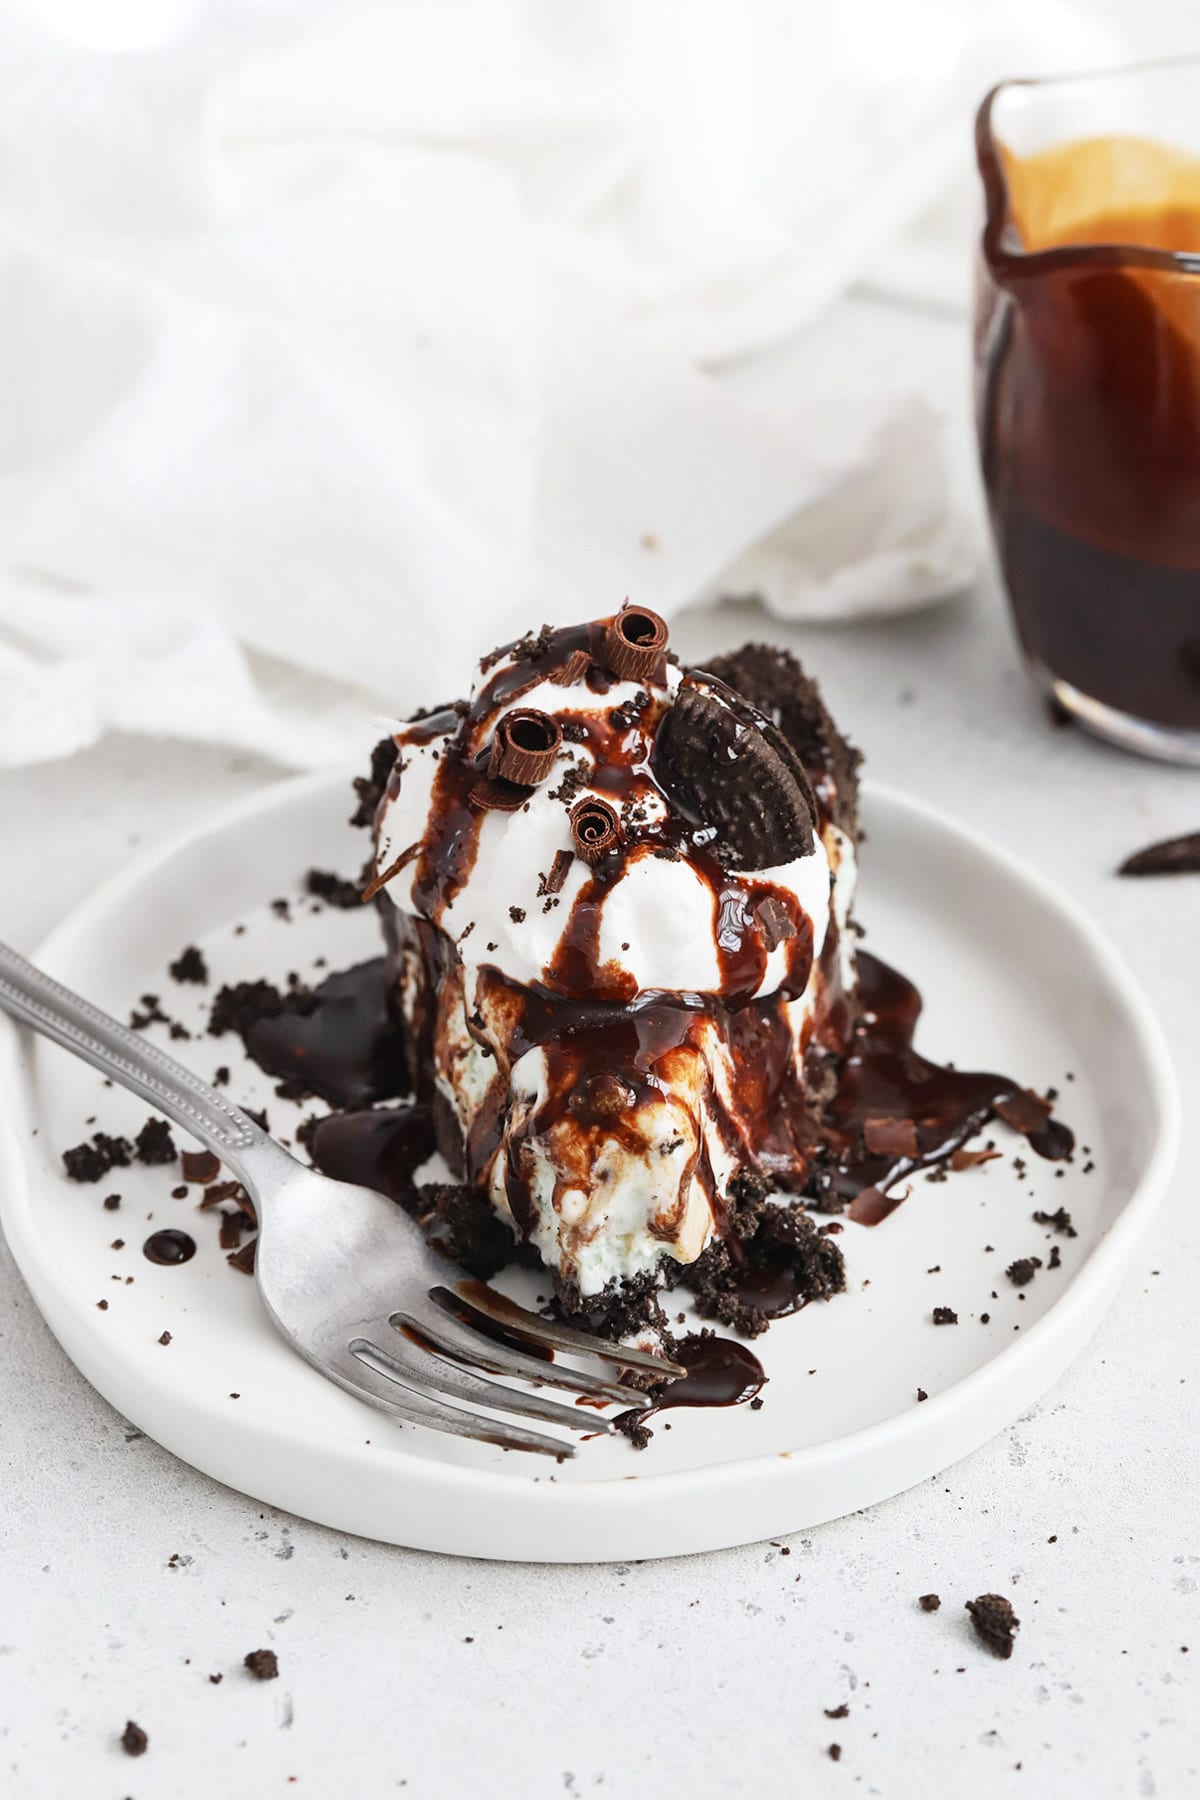 Front view of a slice of gluten-free grasshopper pie topped with whipped cream and chocolate sauce